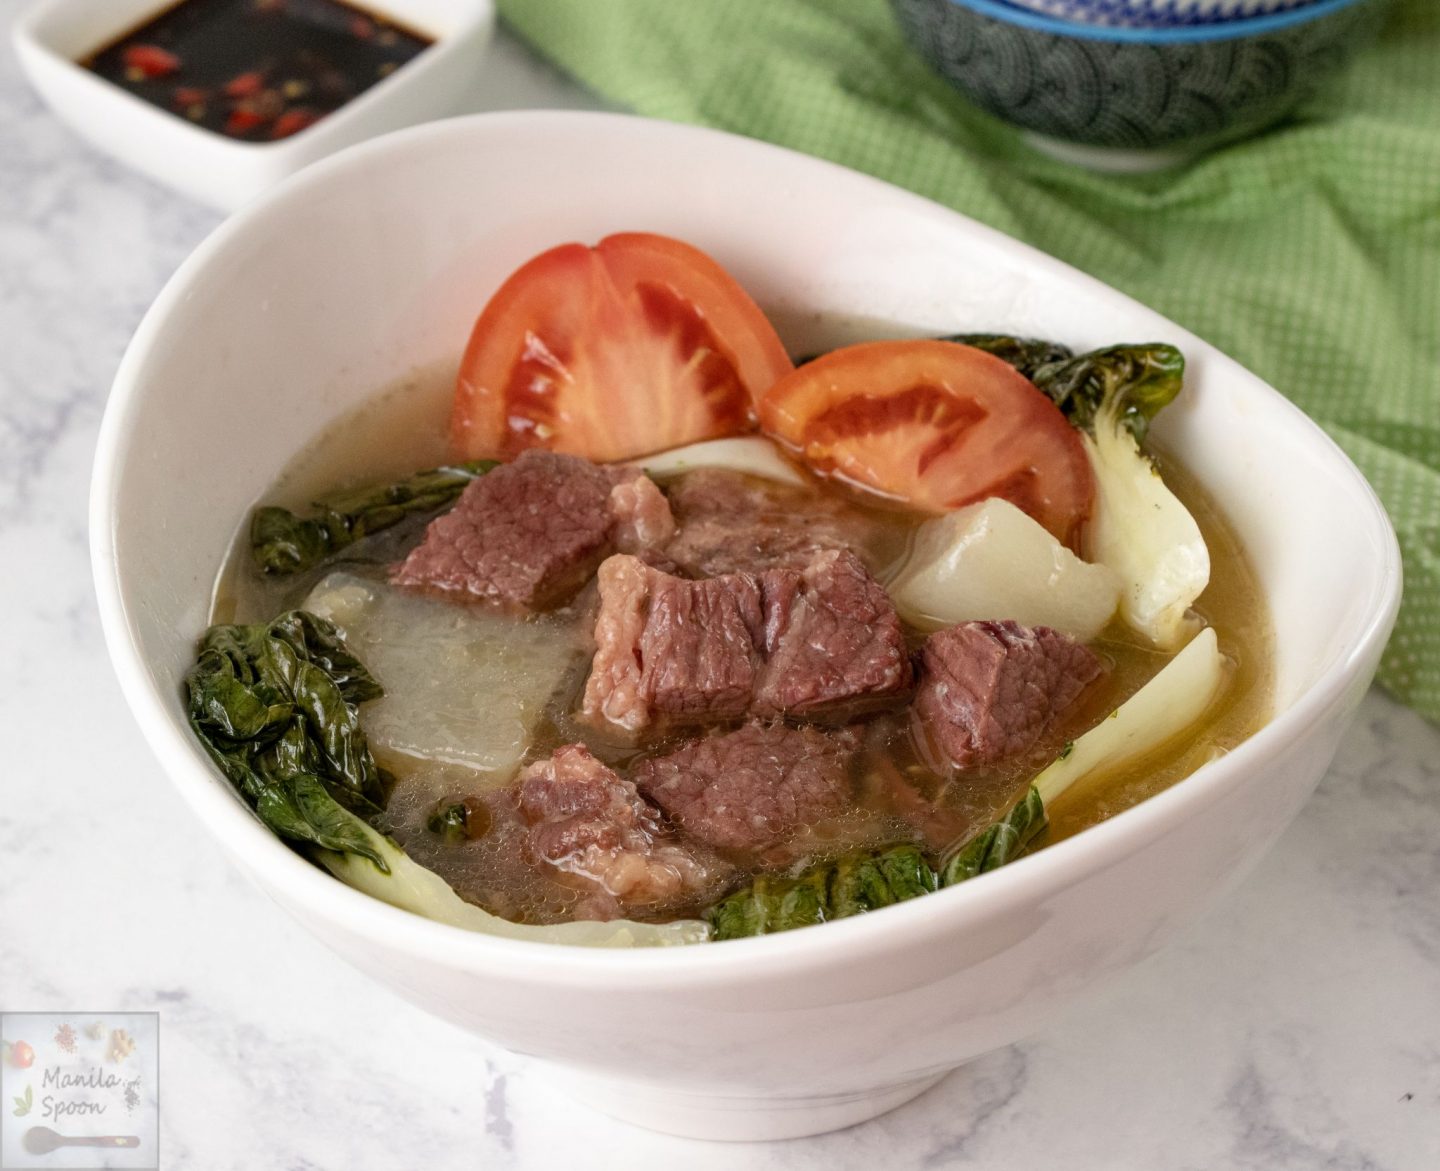 This has now become a classic favorite in my household! Use your corned beef and turn it into this delicious and hearty soup loaded with vegetables with a tangy mouth-puckering flavor that would leave your tastebuds asking for more! Made even easier in the Instant Pot - this Sinigang na Corned Beef (Corned Beef Sour Soup) would become your favorite, too!